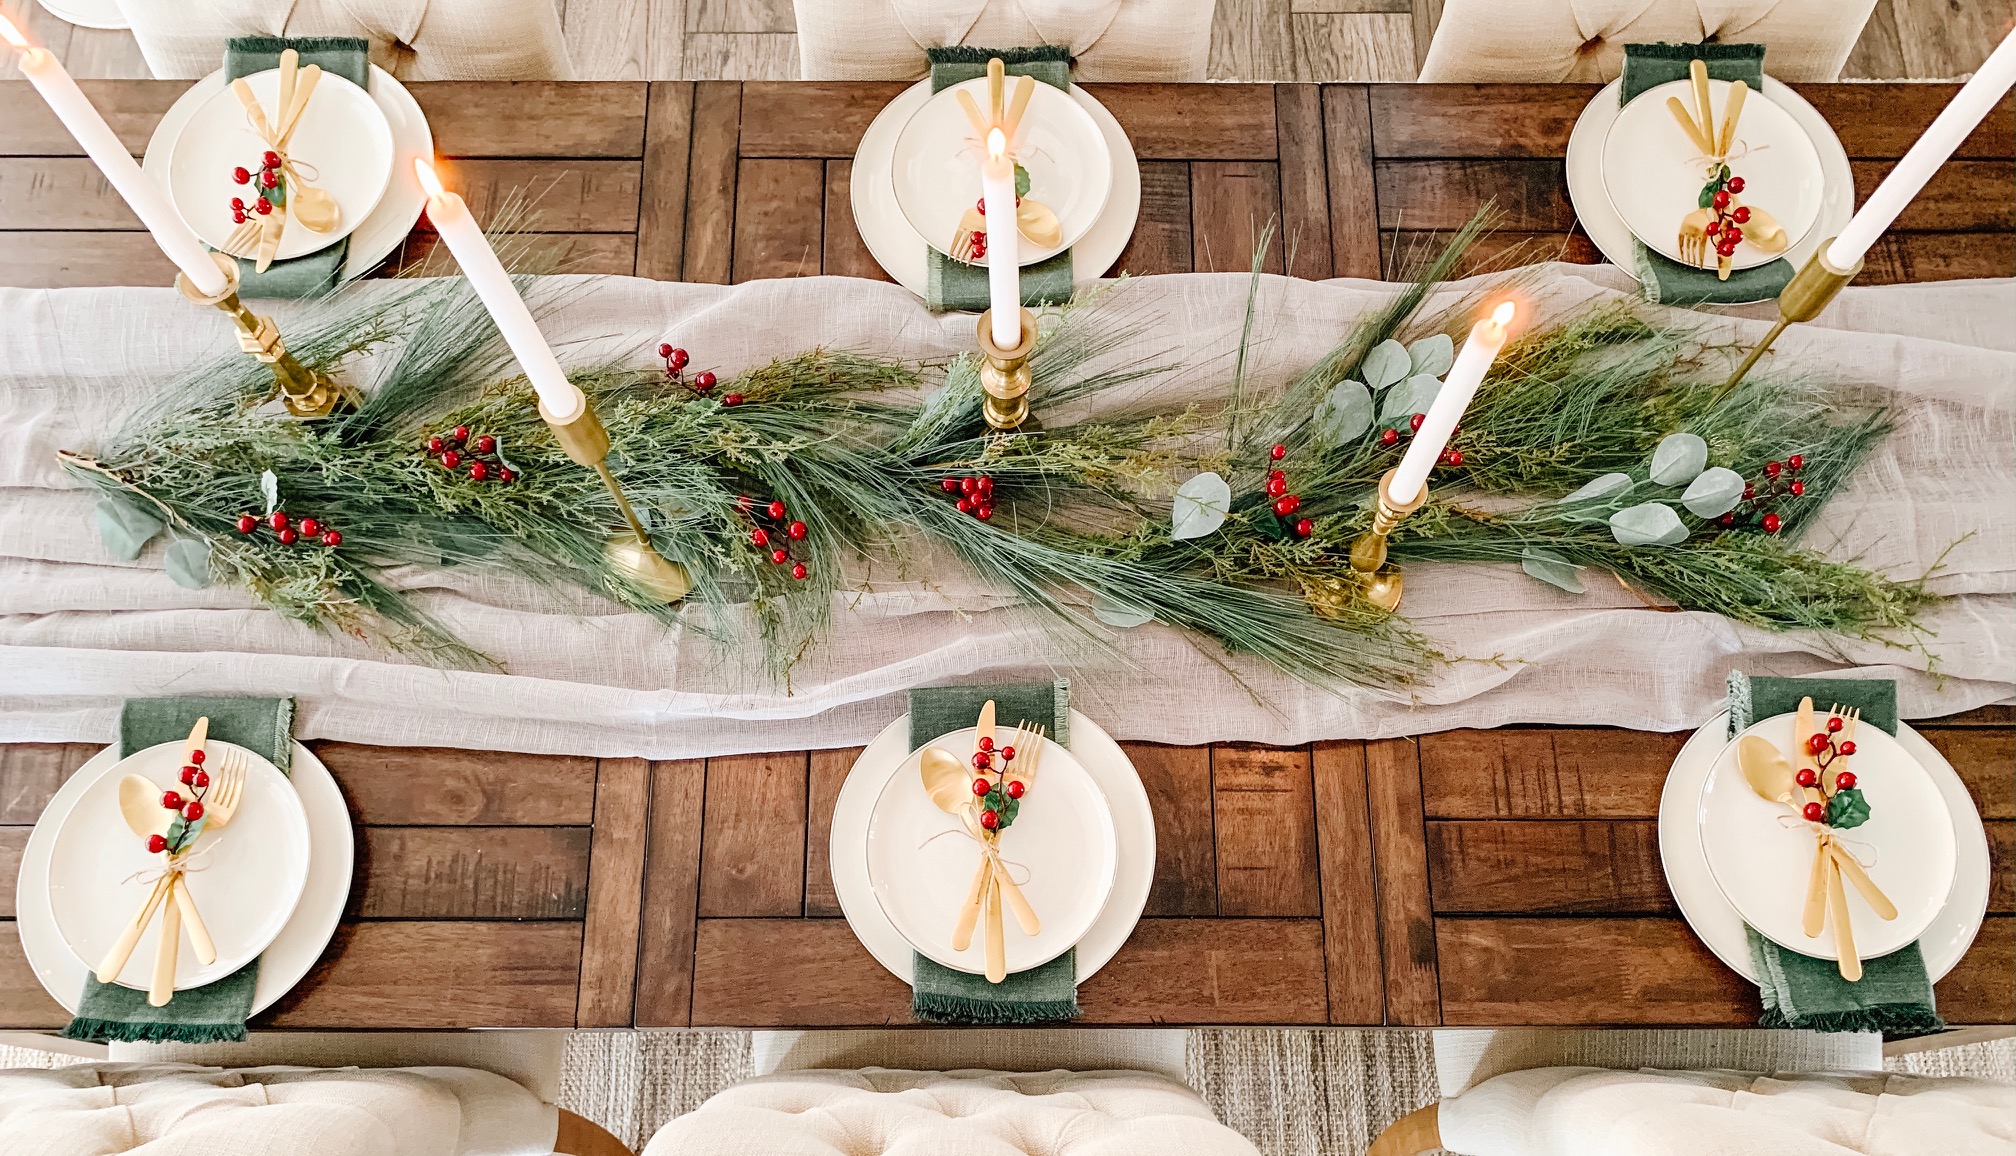 Christmas Tablescape How To Design a Simple Centerpiece